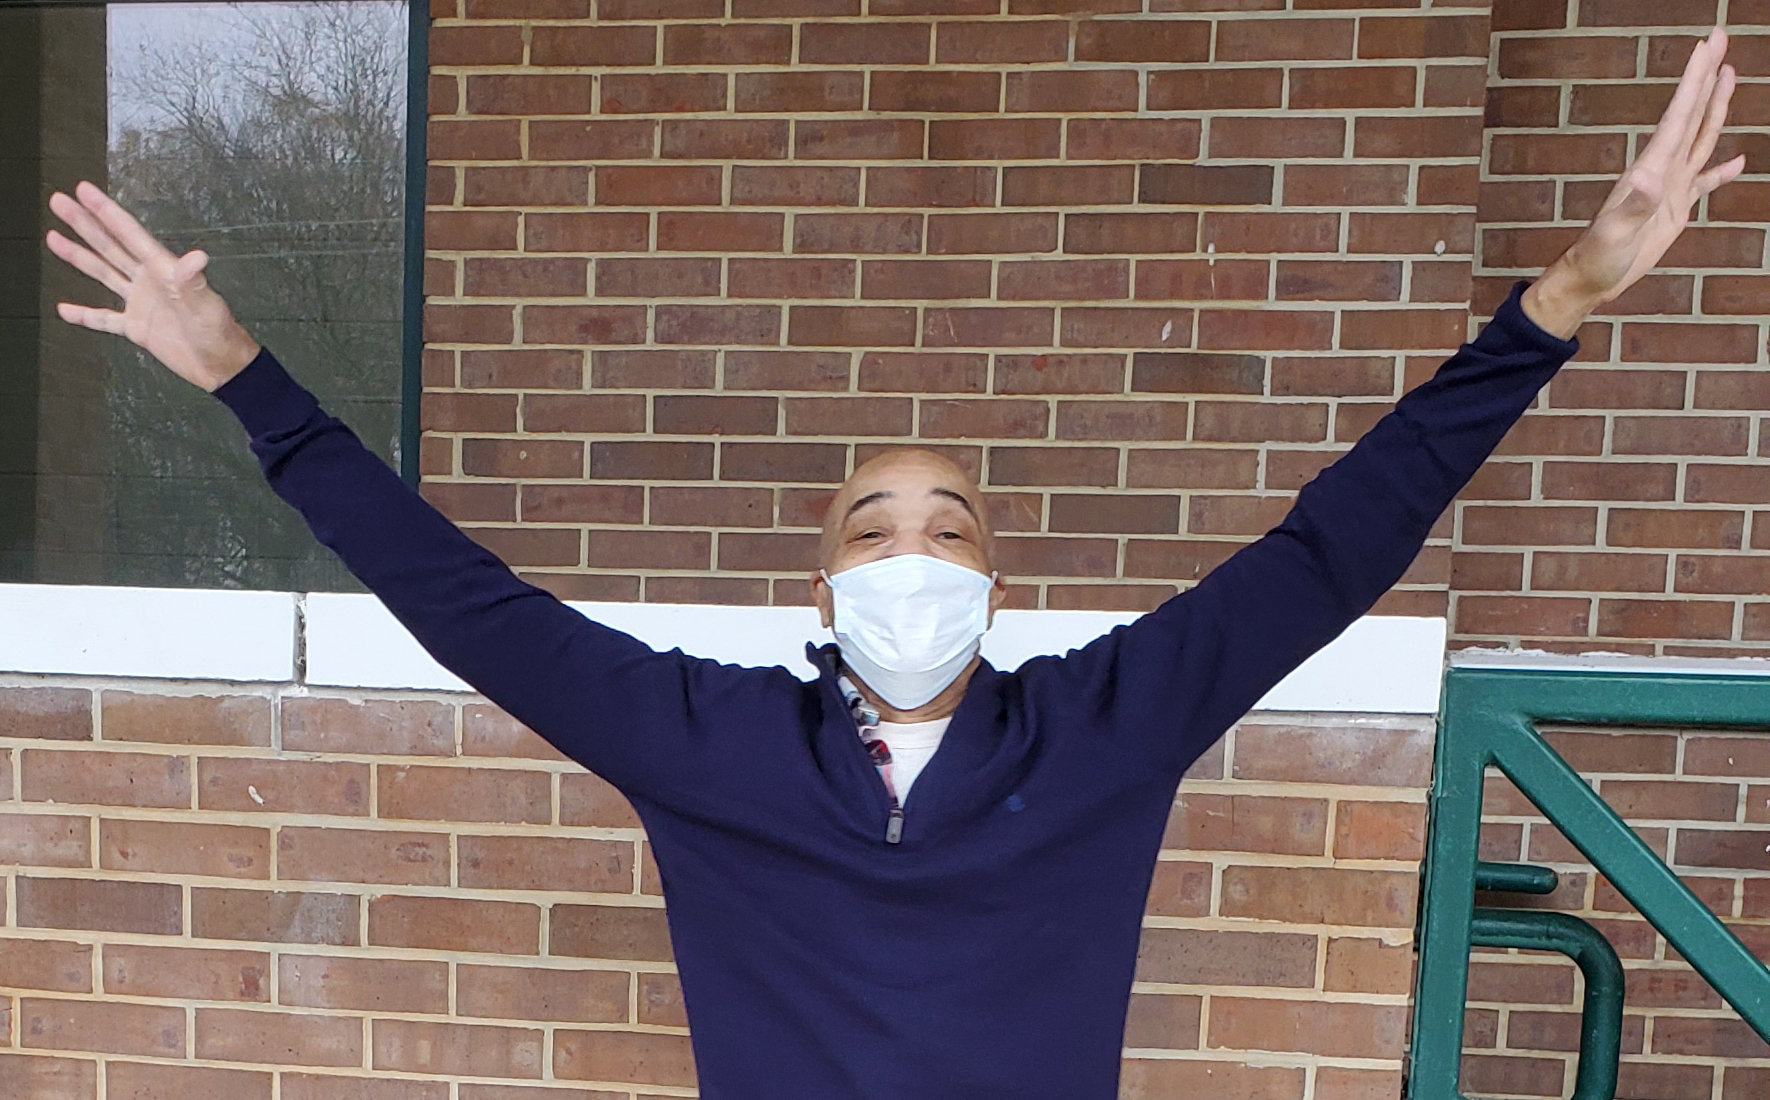 Eddie Lee Howard following his release from prison in December 2020 (Image: Courtesy of the Mississippi Innocence Project).